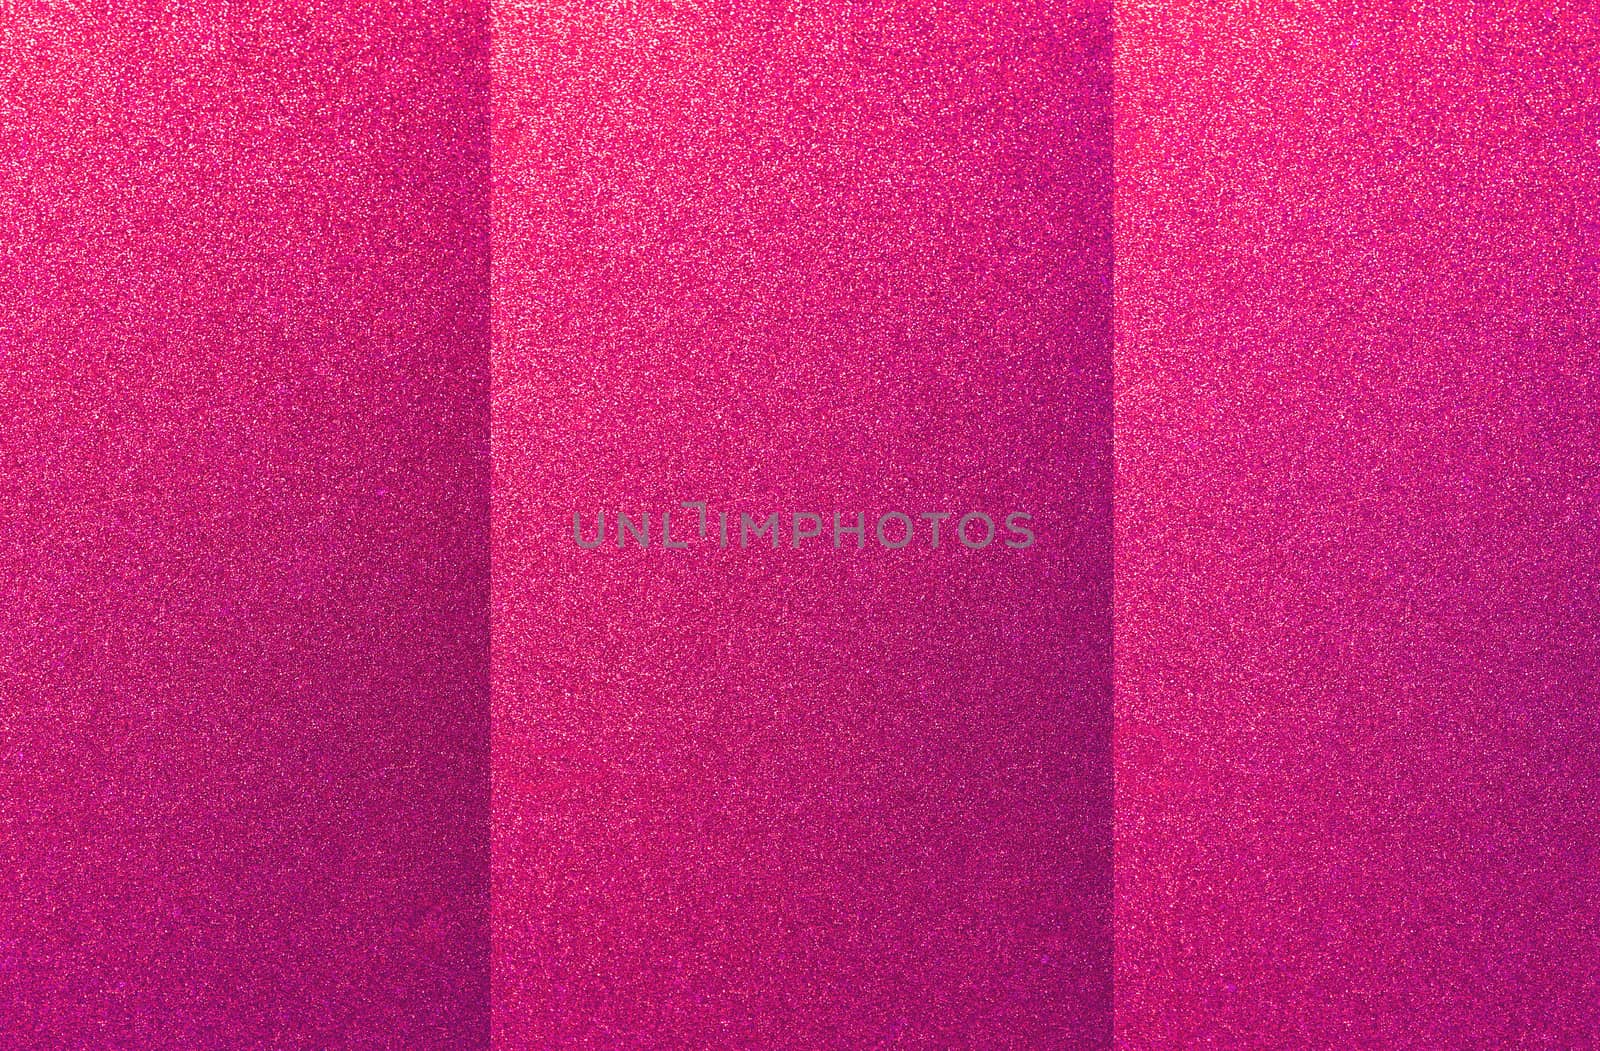 pink Paper glitter texture background, kraft paper vertical with Unique design of paper, Soft gold paper style For aesthetic creative design